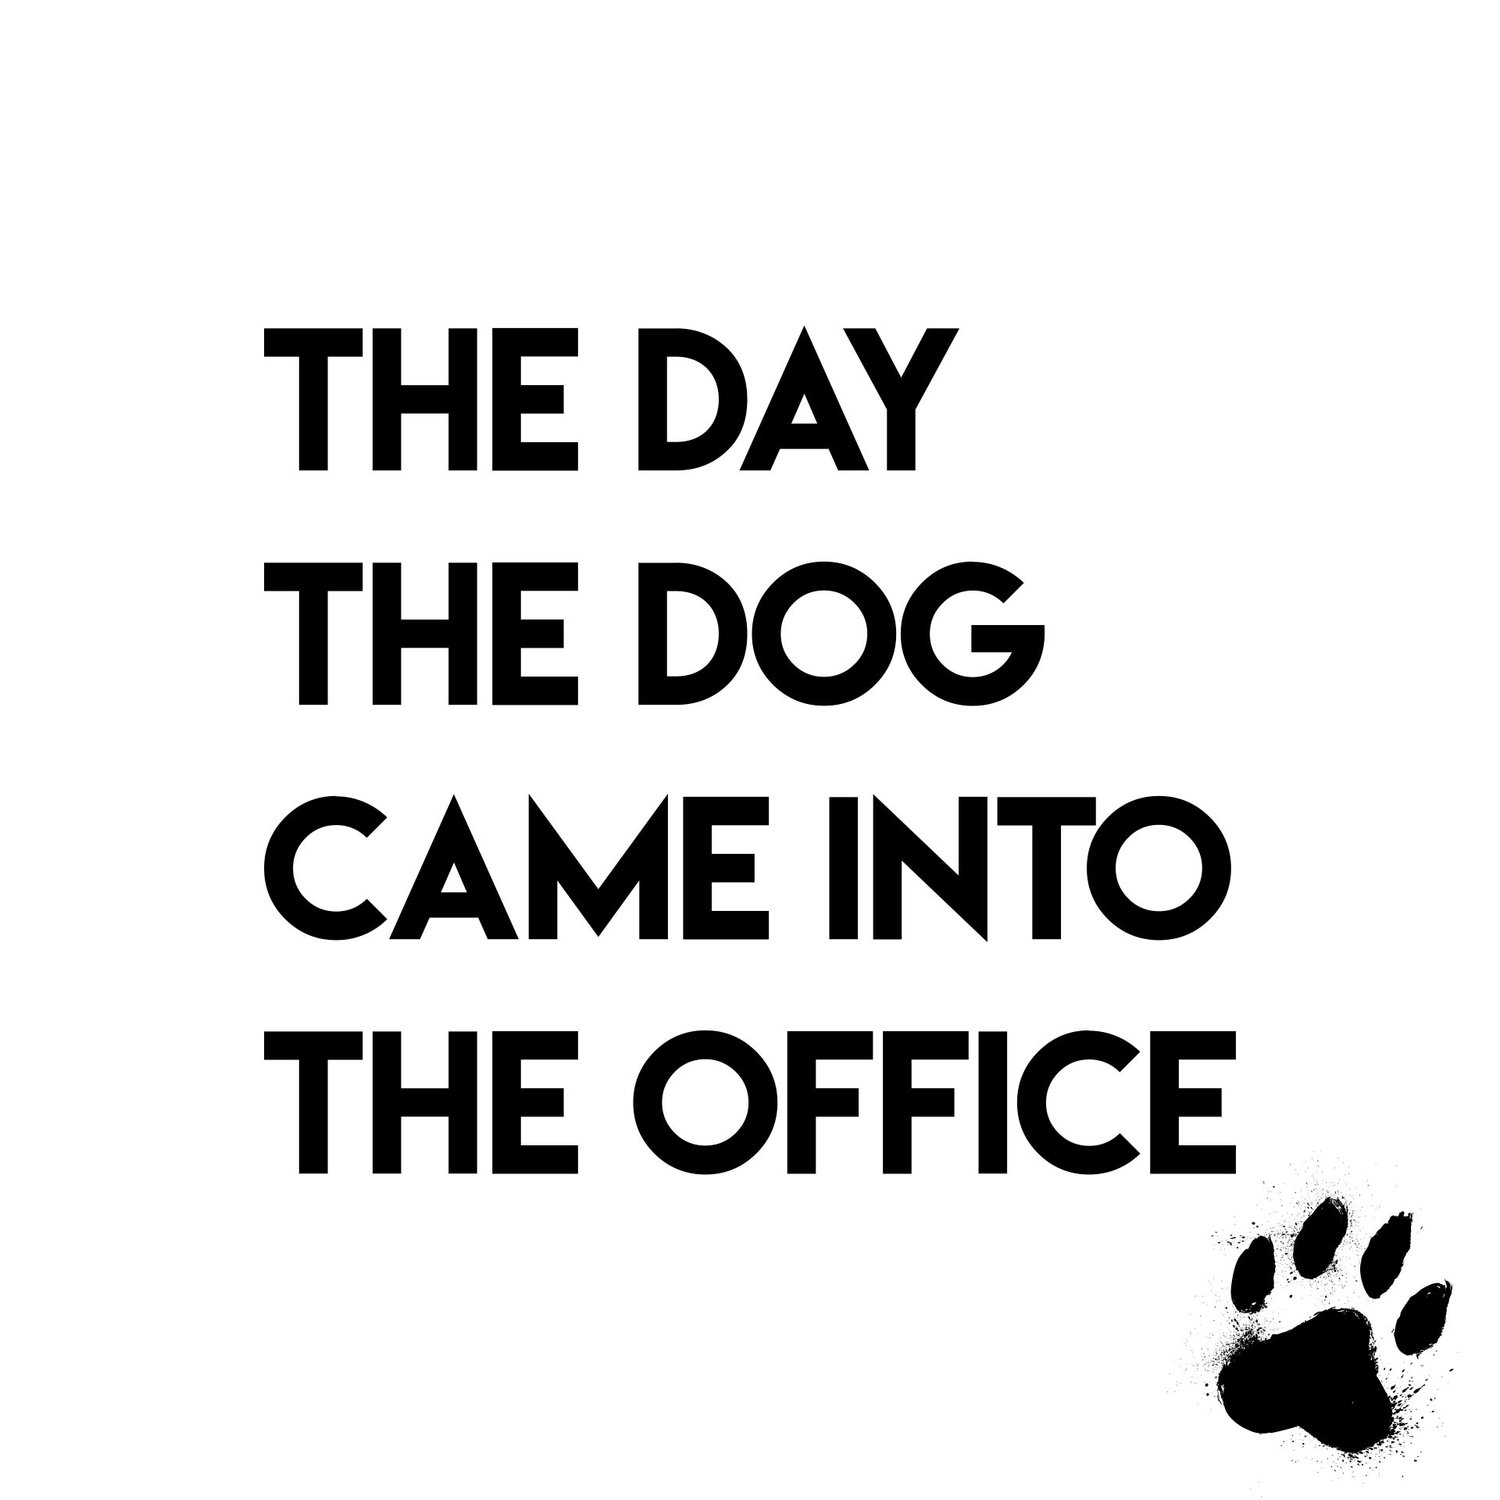 The Day The Dog Came Into The Office